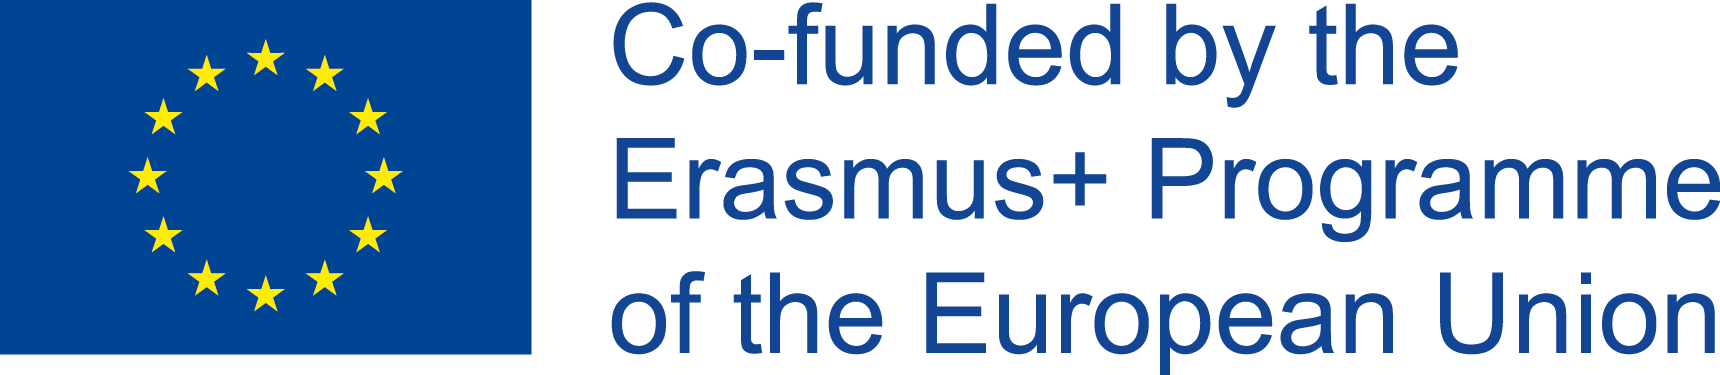 Co-funded by Erasmus+ Programme logo